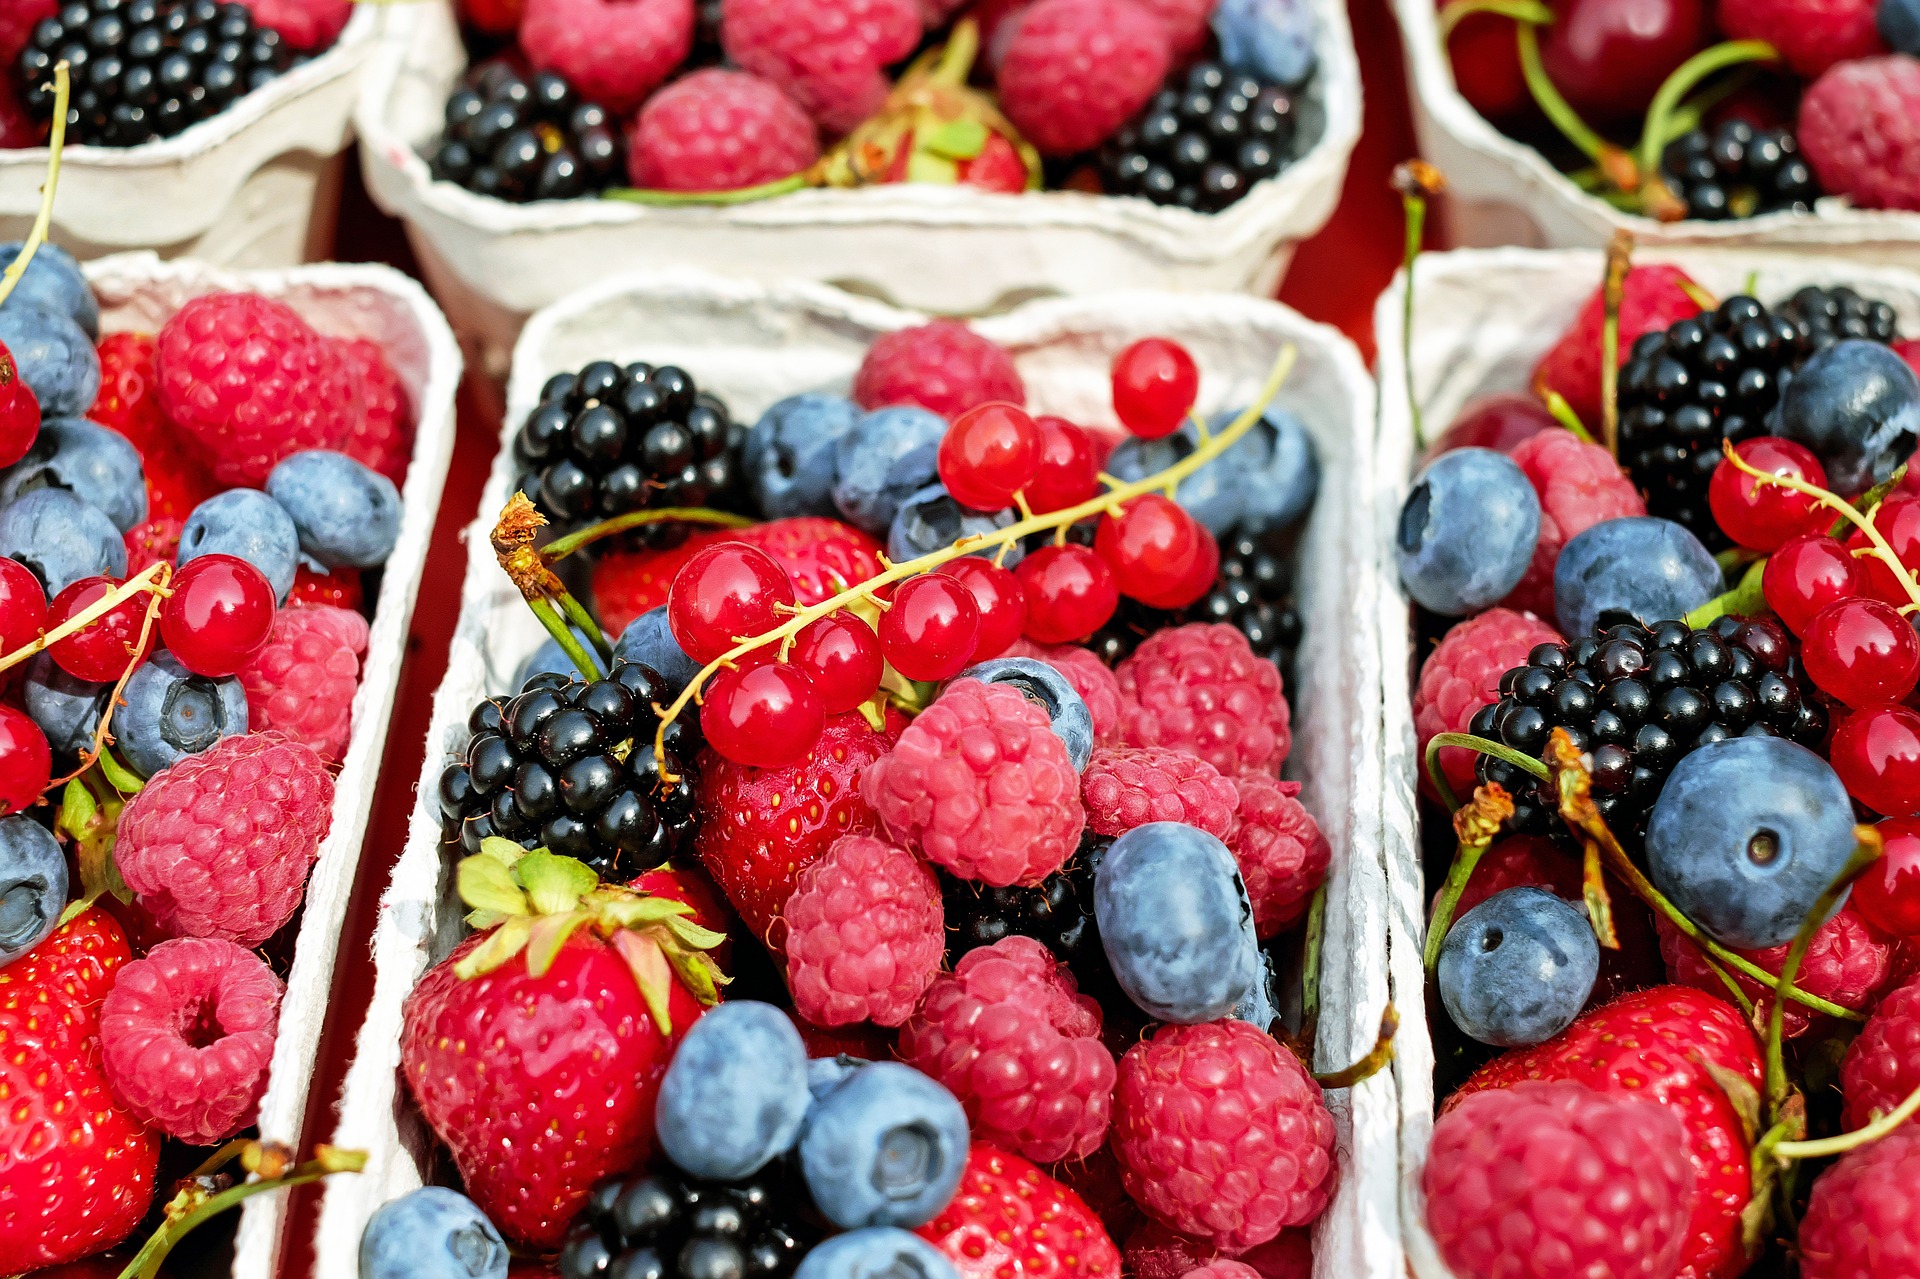 Containers of different types of berries.